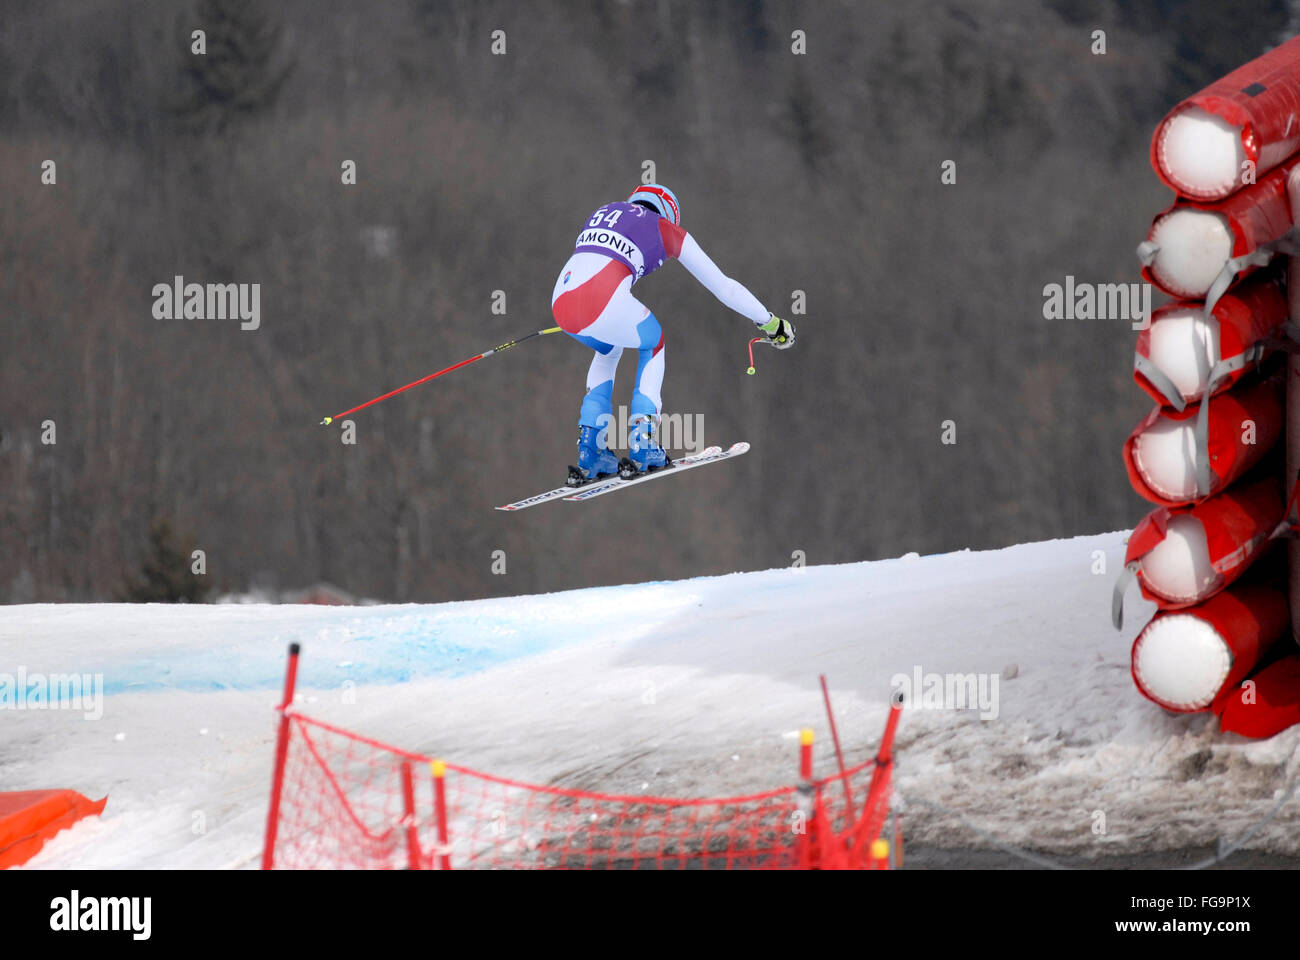 Mens downhill ski racer in the air Stock Photo